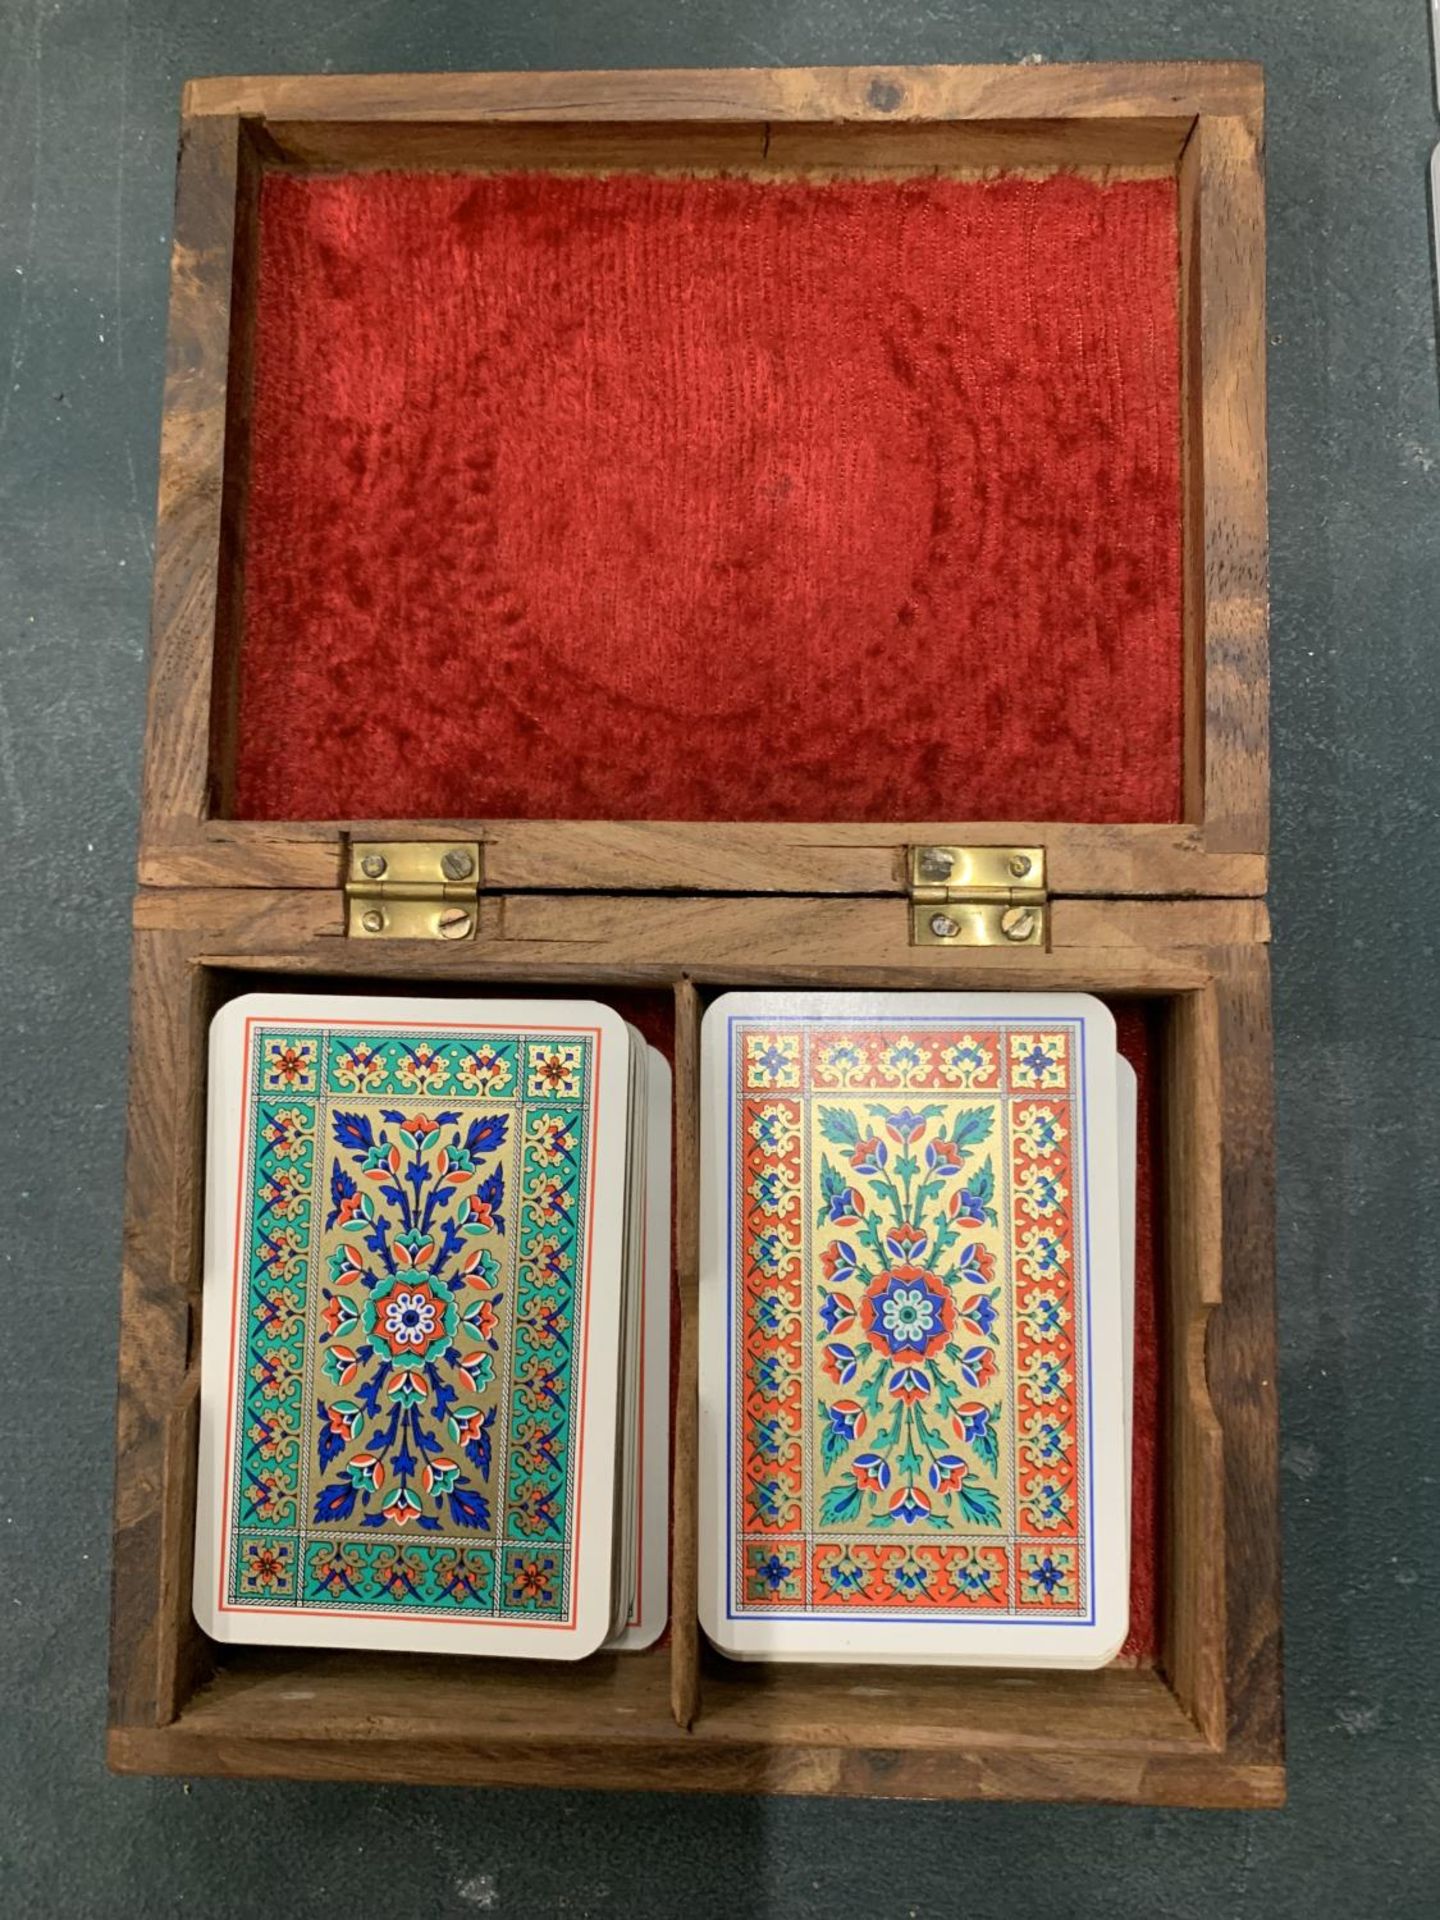 A WOODEN BOX CONTAINING TWO PACKS OF BRIDGE CARDS